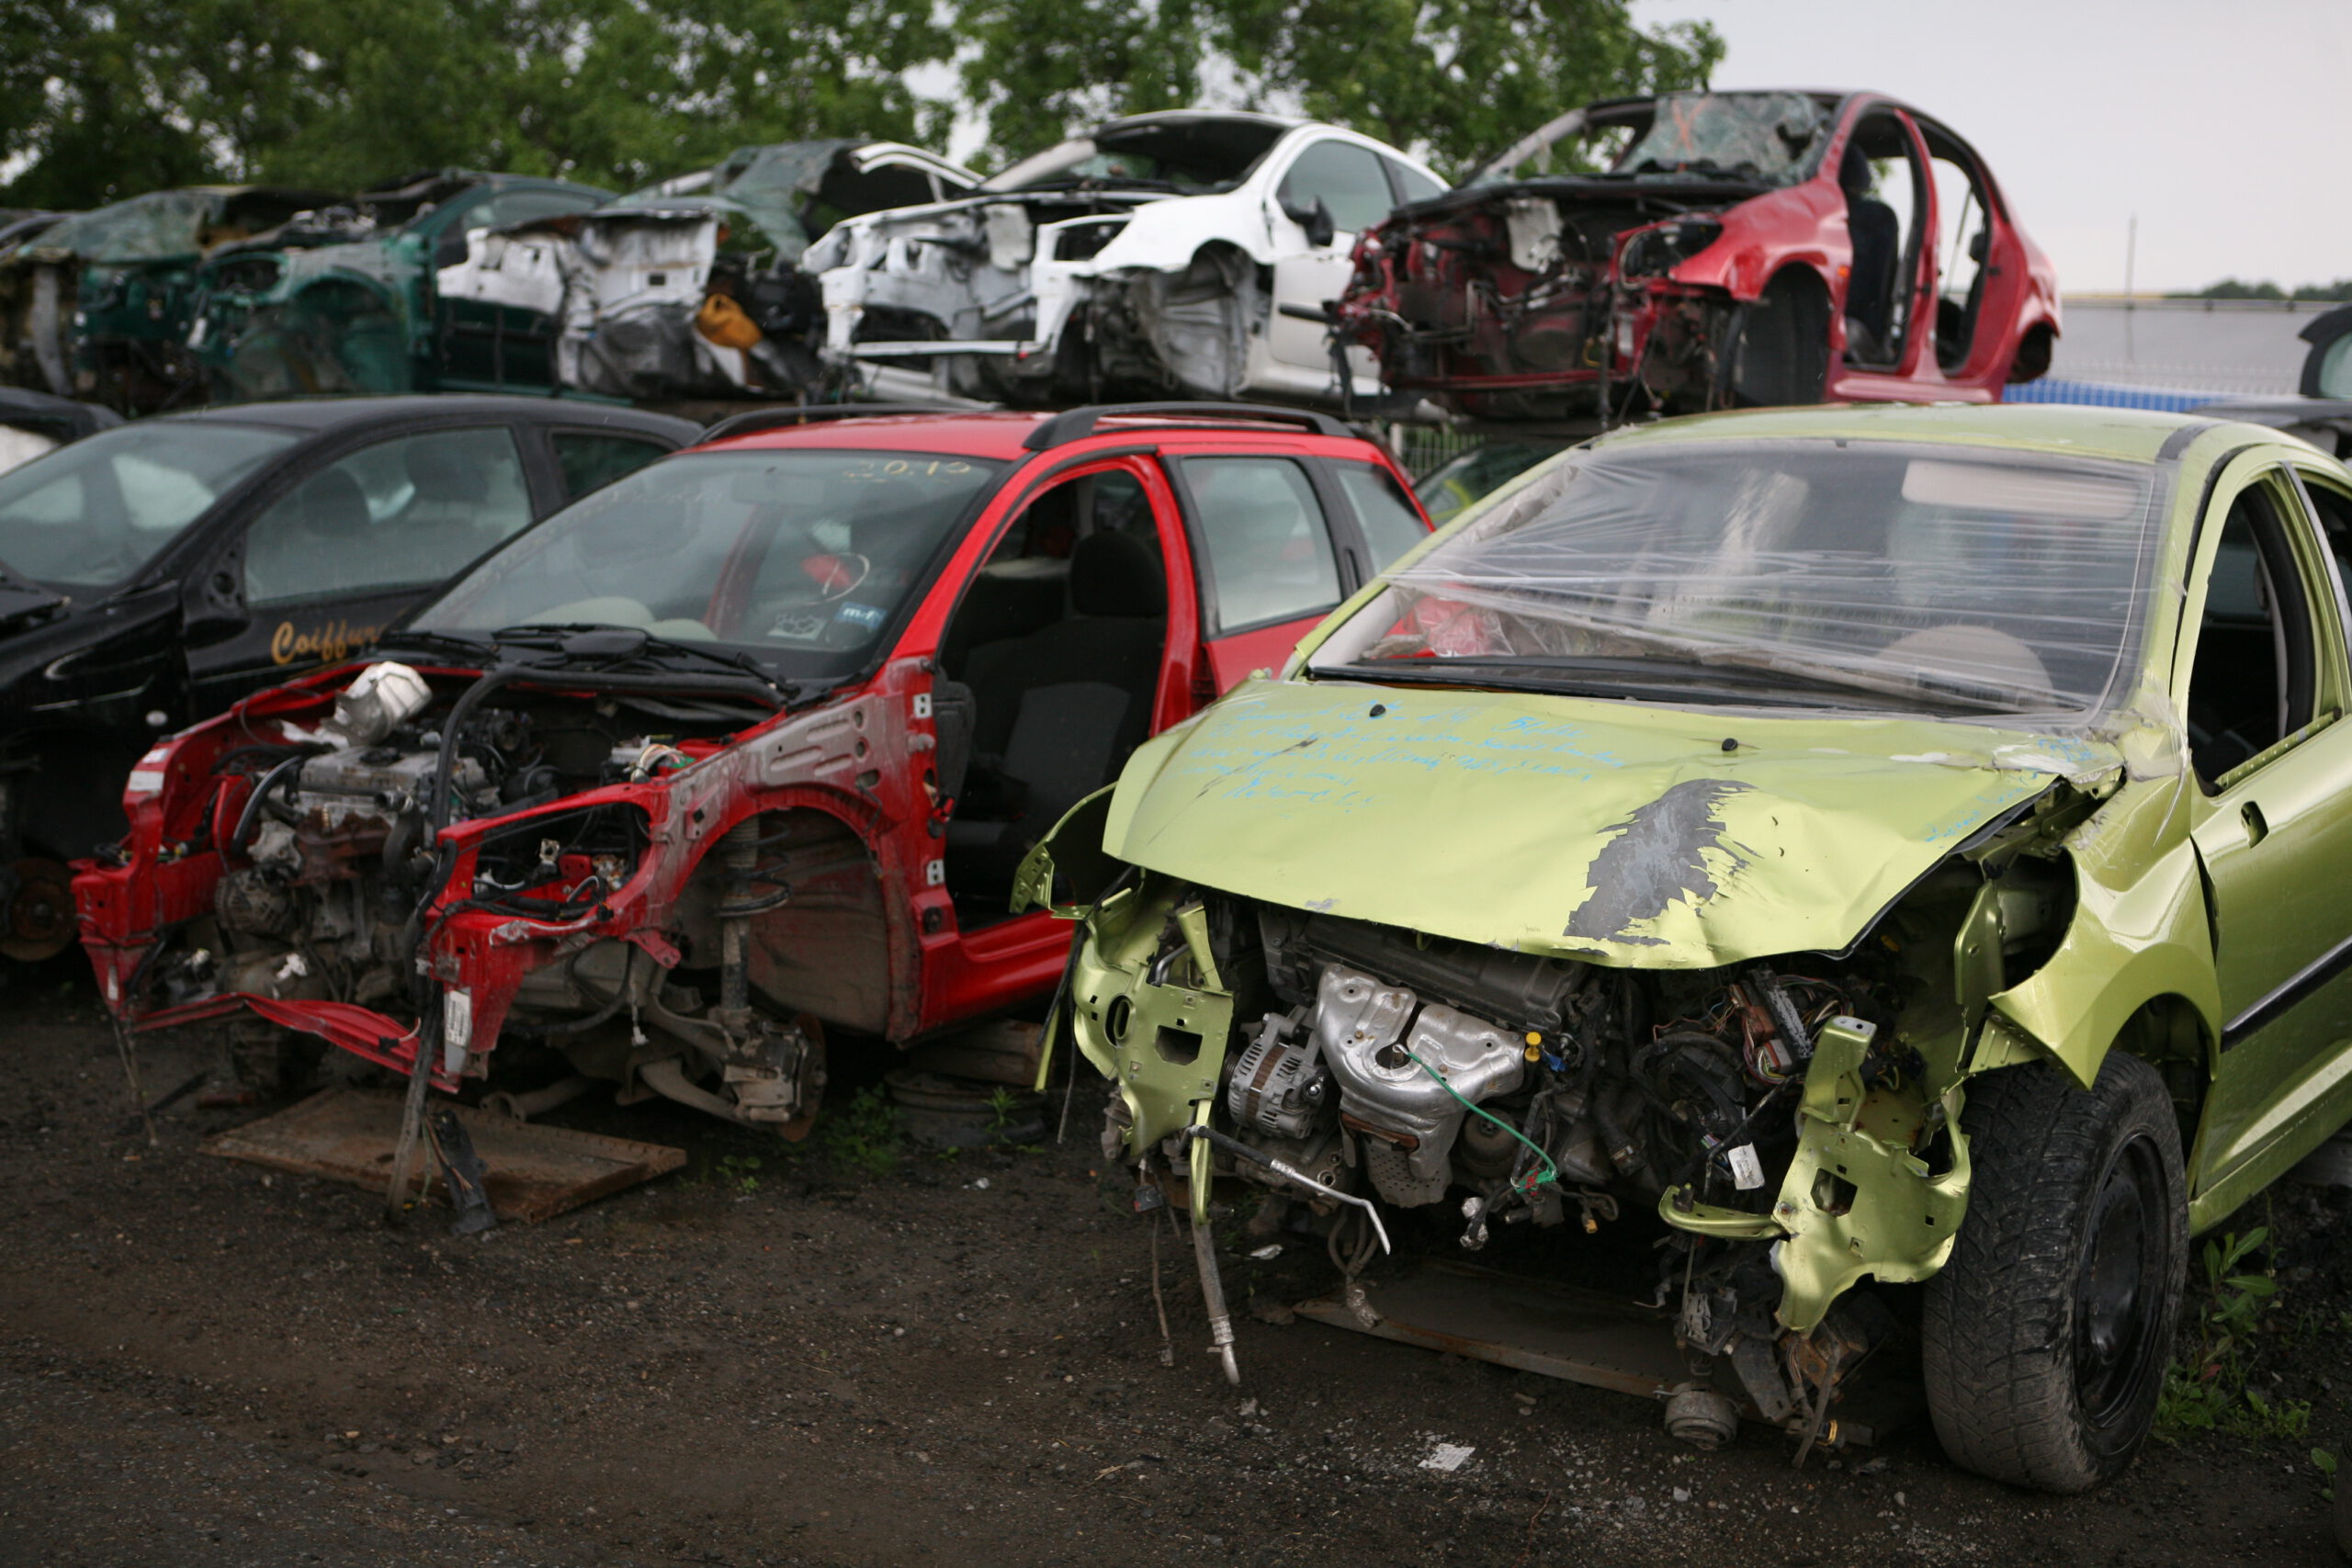 Cash for Junk Cars Near Me: Top Junk Car Dealers to Sell Your Old Car for Cash